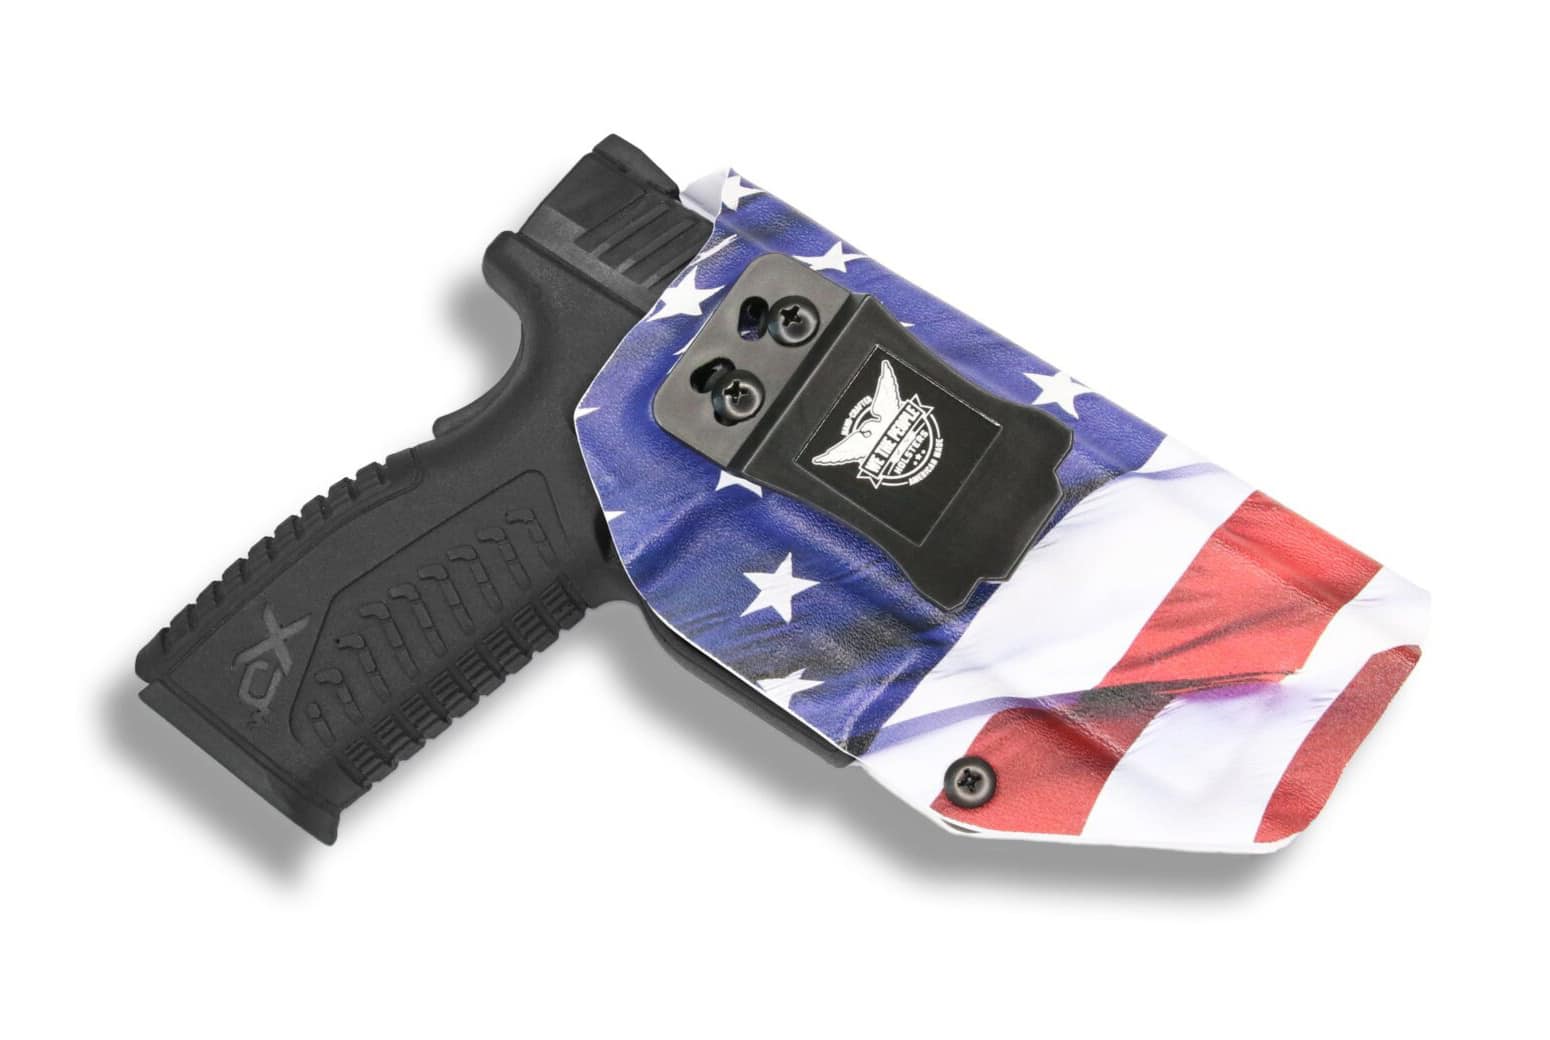 We the People Kydex holster with Springfield Armory polymer pistol